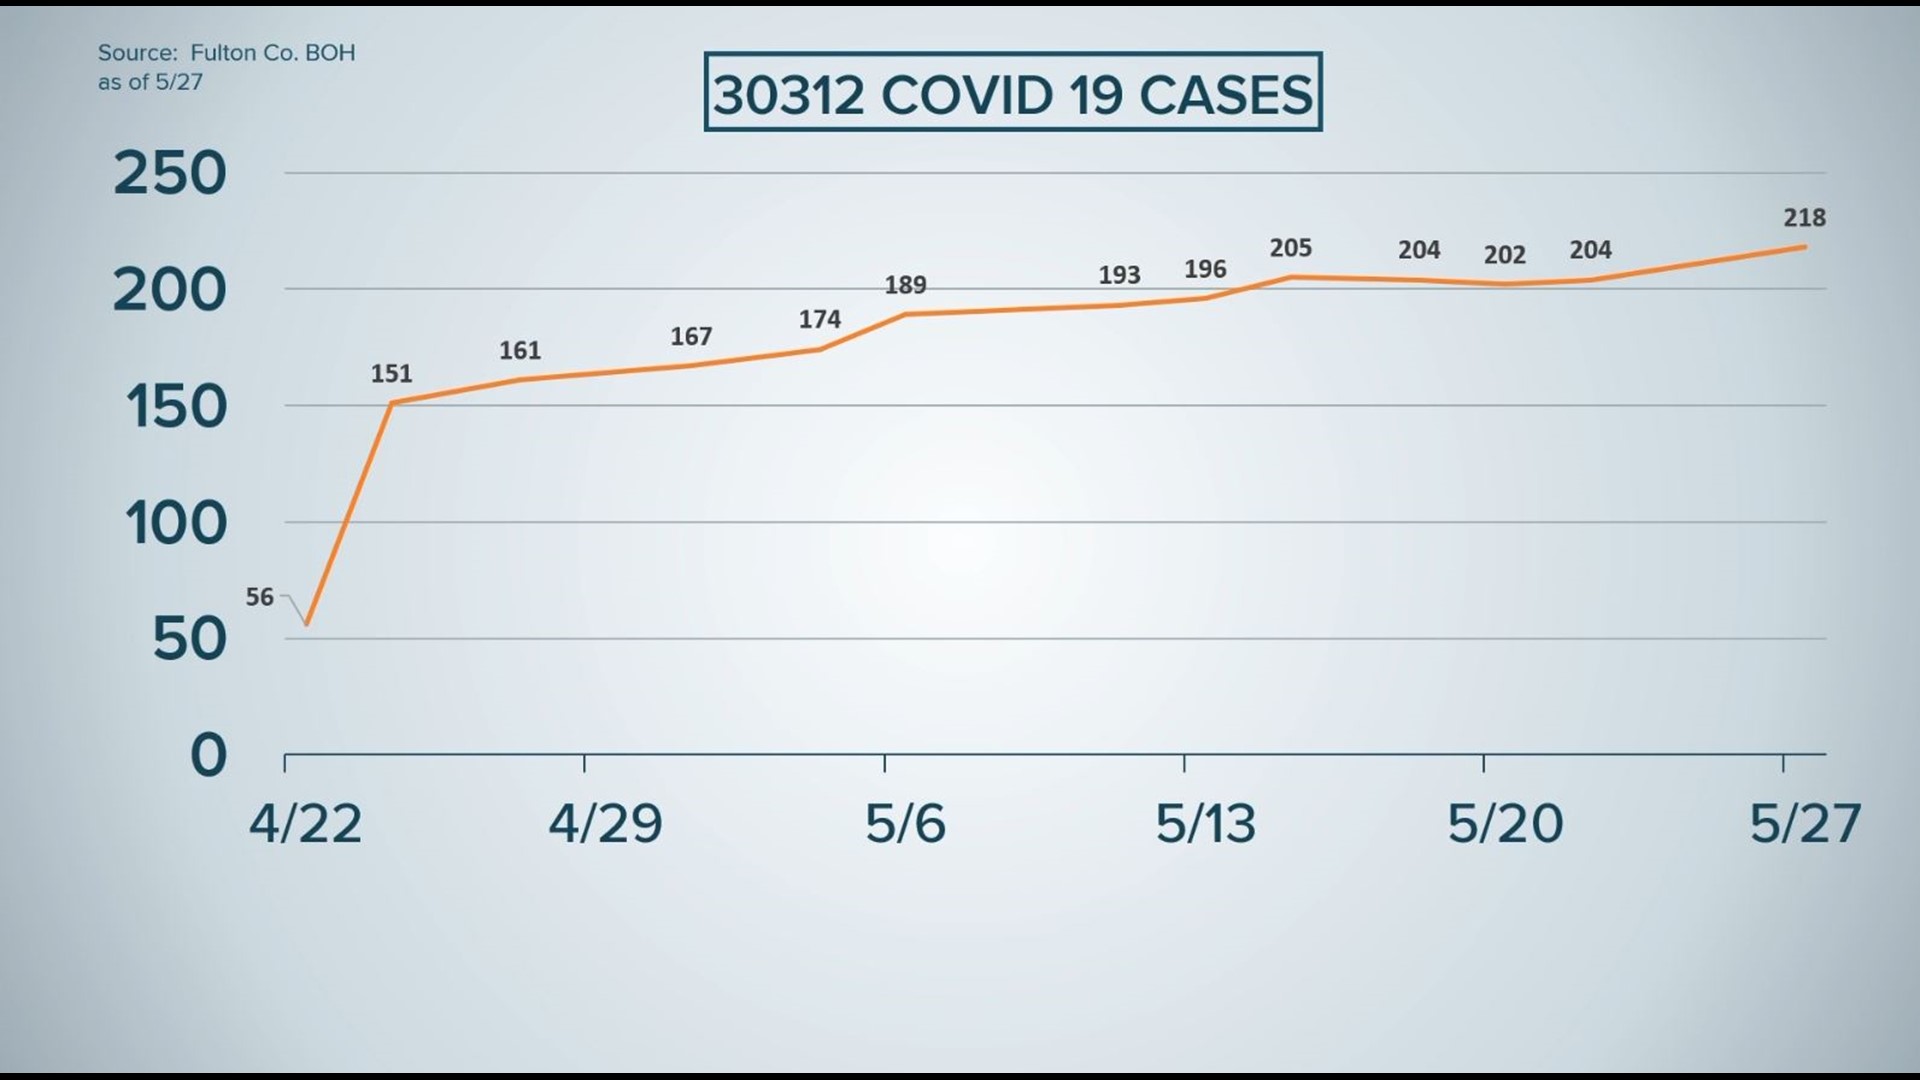 The data shows Fulton County zip codes with high spikes in COVID-19 cases are linked to nursing homes.